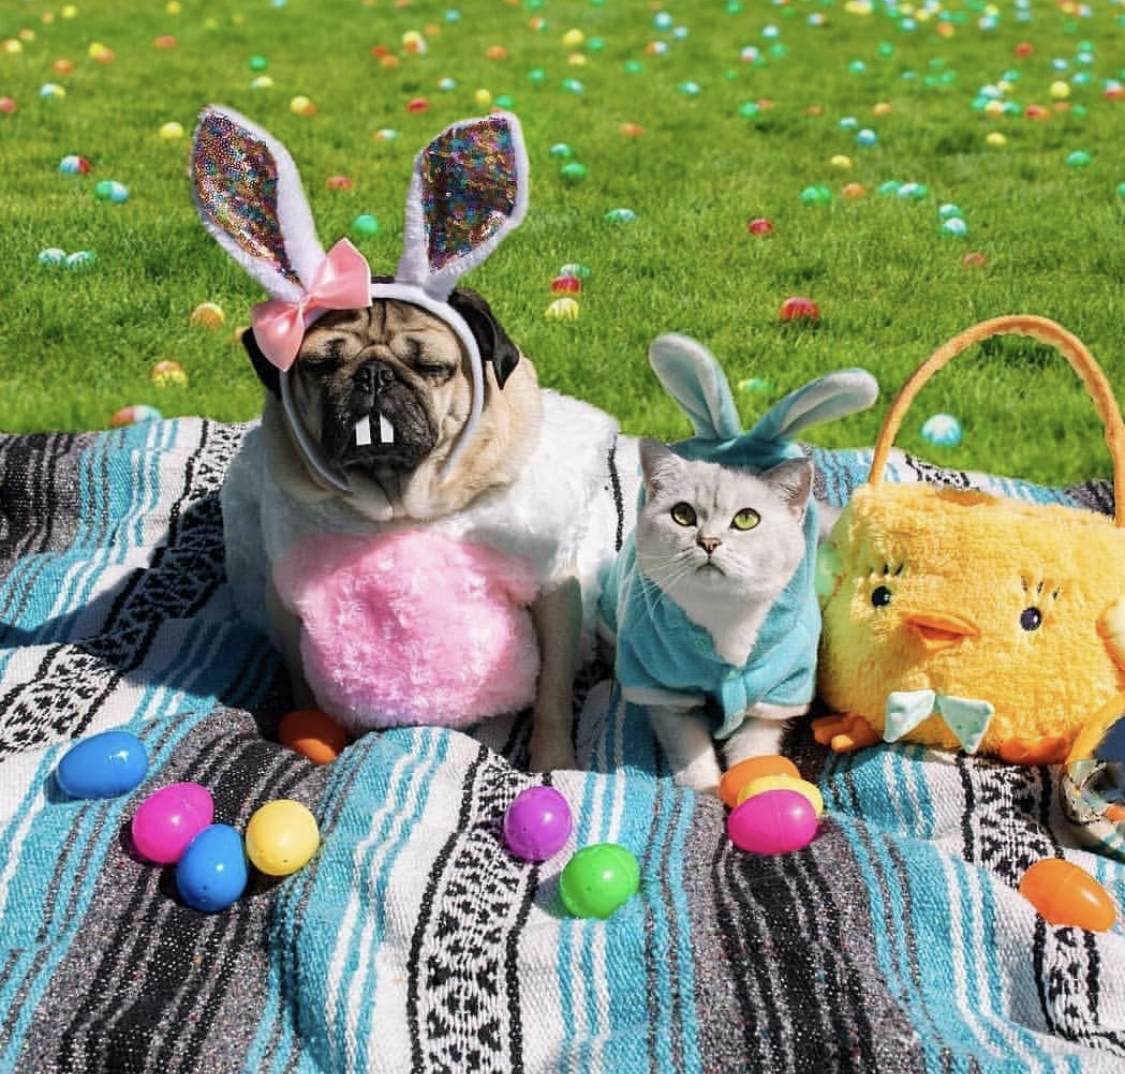 A Pug in its easter costume with a cat sitting next to each other on a blanket in the yard